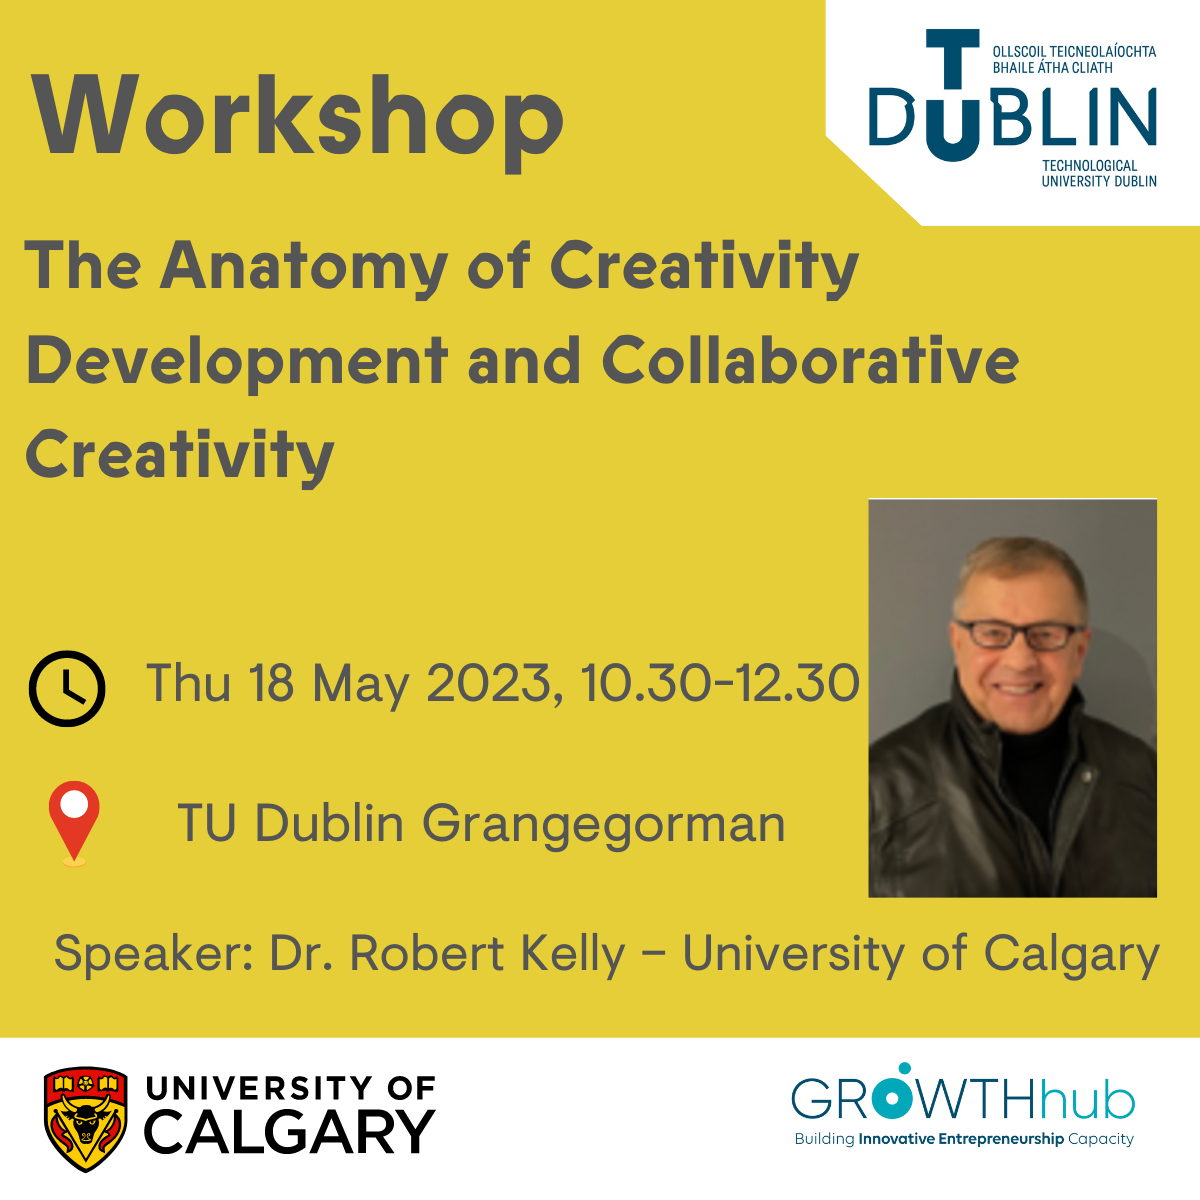 Image for Staff workshop: The Anatomy of Creativity Development and Collaborative Creativity 

